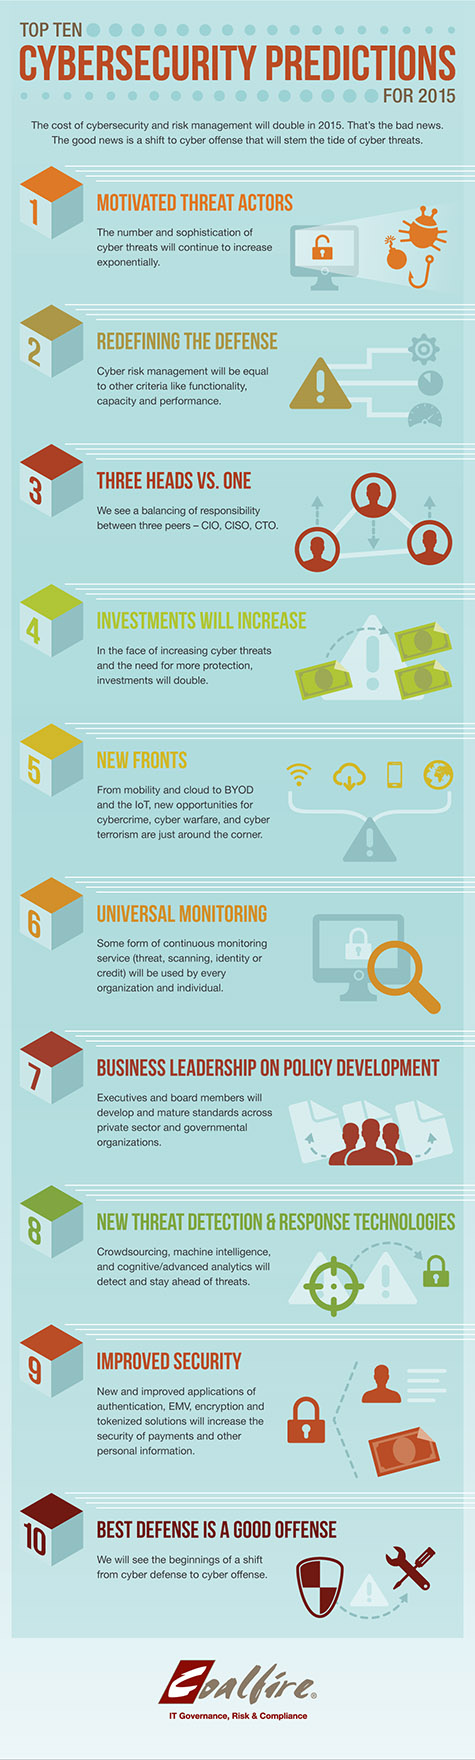 Infographic: Top 10 Cybersecurity Predictions for 2015